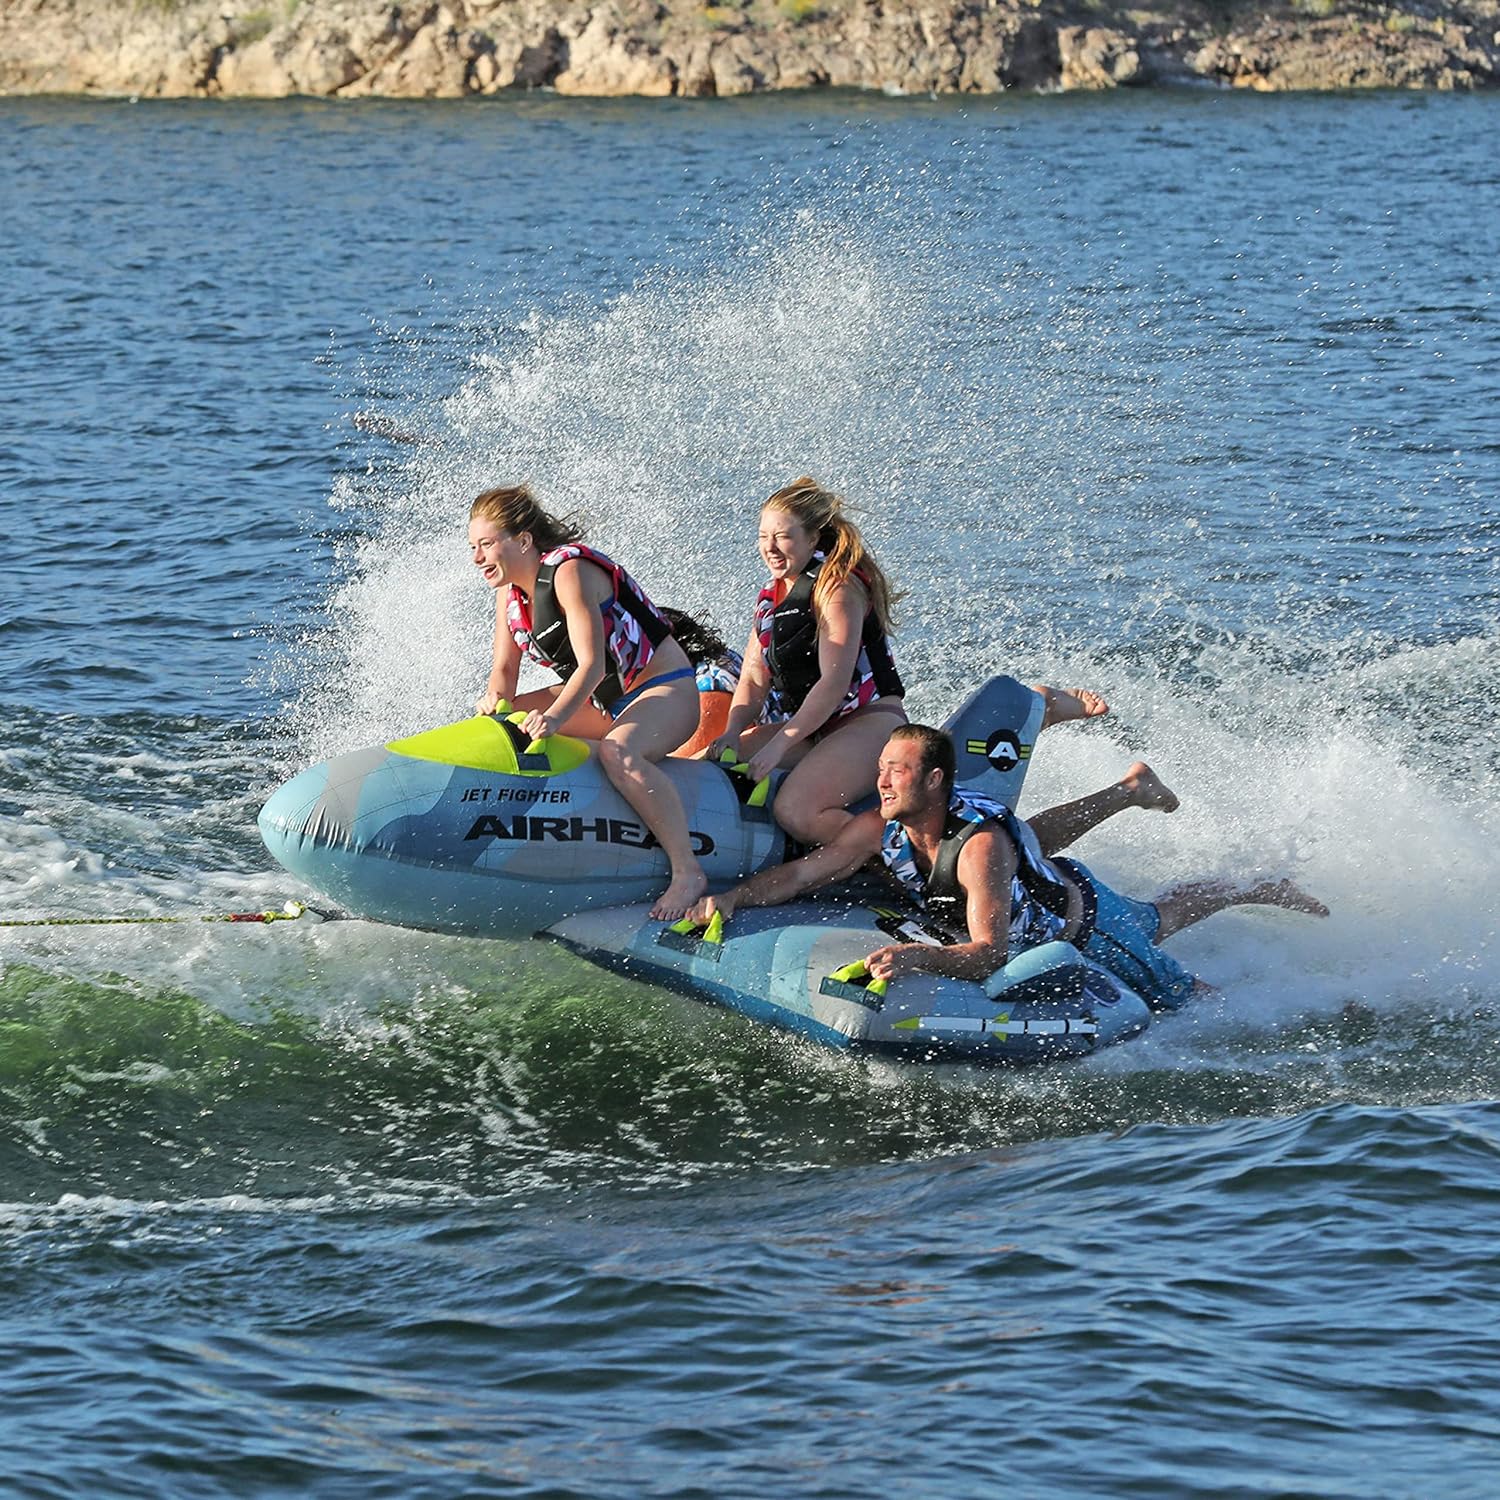 Airhead Jet Fighter | 1-4 Rider Towable Tube for Boating